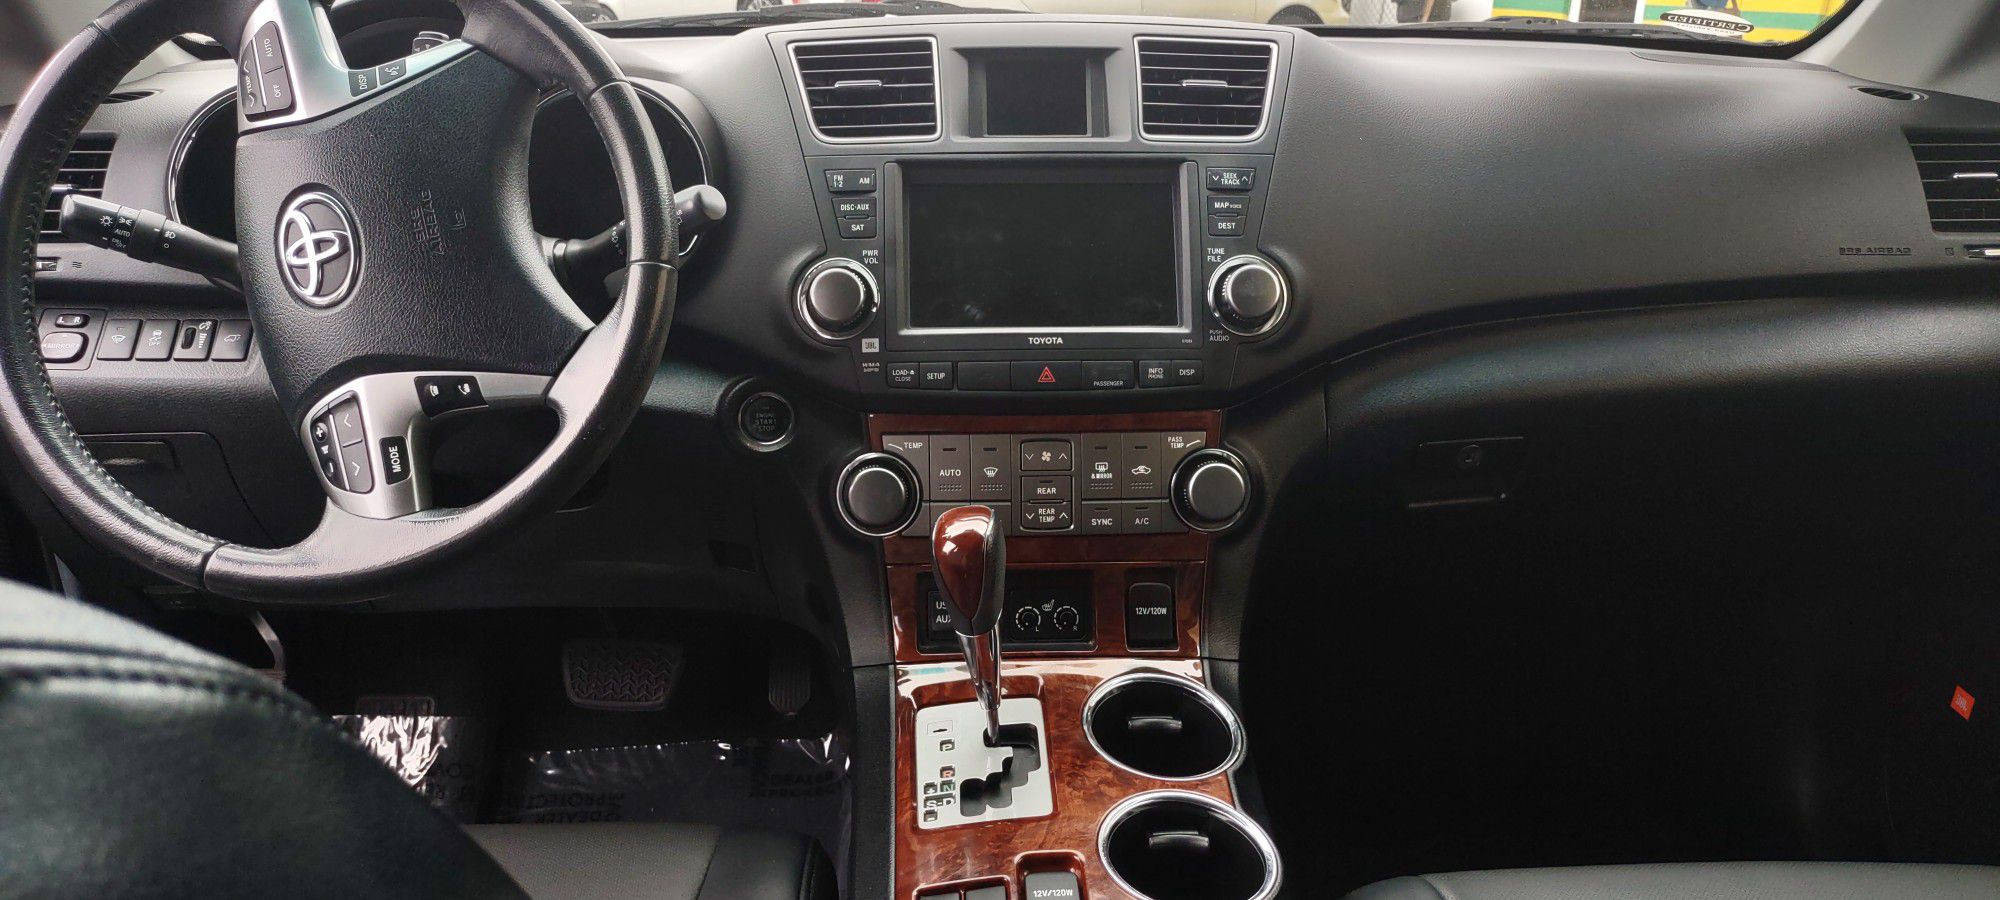 TOYOTA HIGHLANDER 2011/ BUY HERE PAY HERE